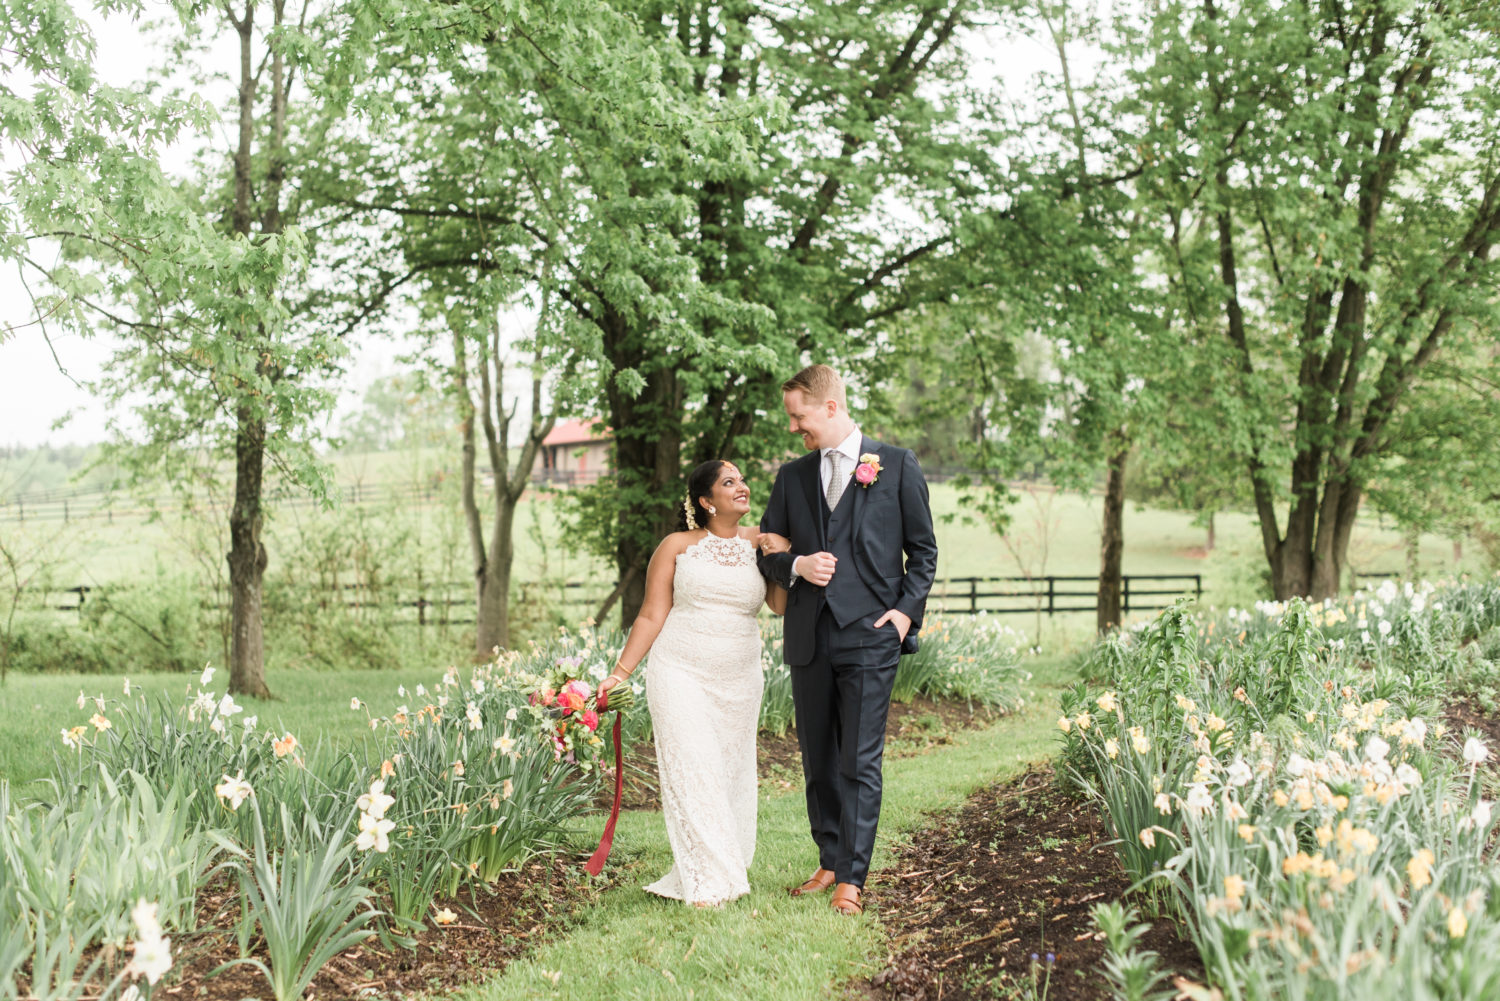 Luck & Love Photography // L&L Events Wedding Planners // Riverside On The Potomac Wedding, Leesburg Virginia